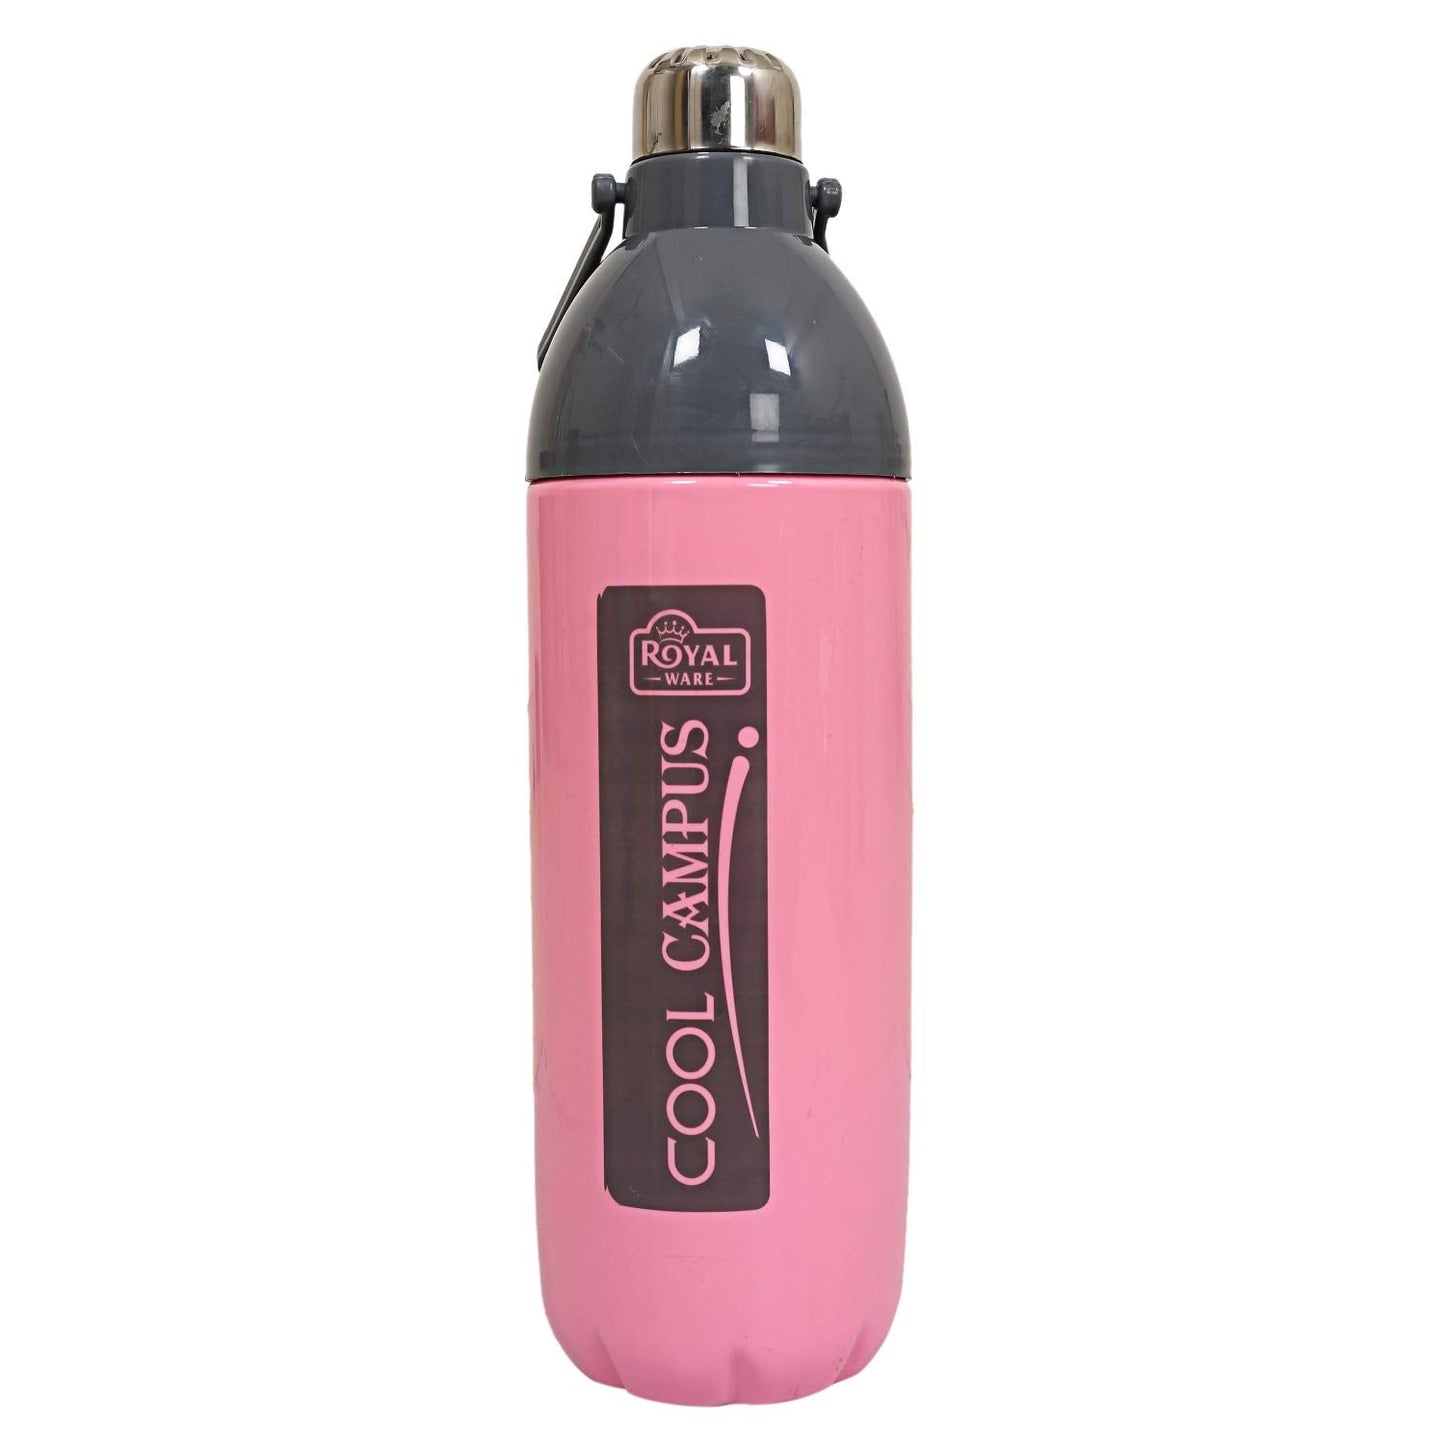 Kuber Industries Plastic Insulated Water Bottle with Handle 2200 ML Pink